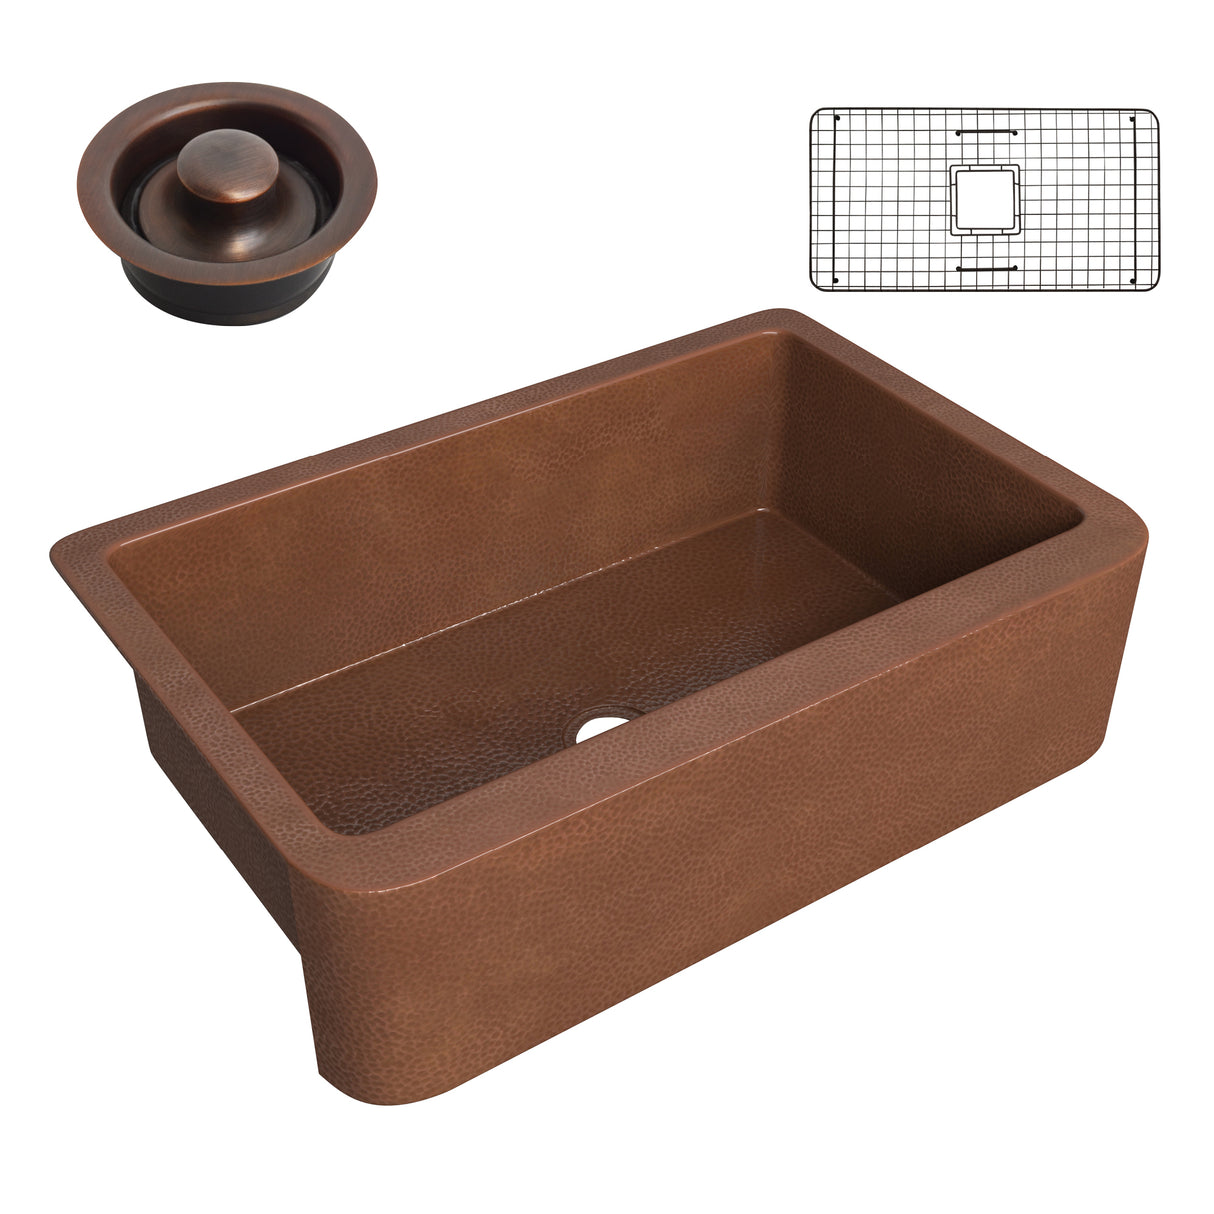 ANZZI SK-013 Miletus Farmhouse Handmade Copper 33 in. 0-Hole Single Bowl Kitchen Sink in Hammered Antique Copper